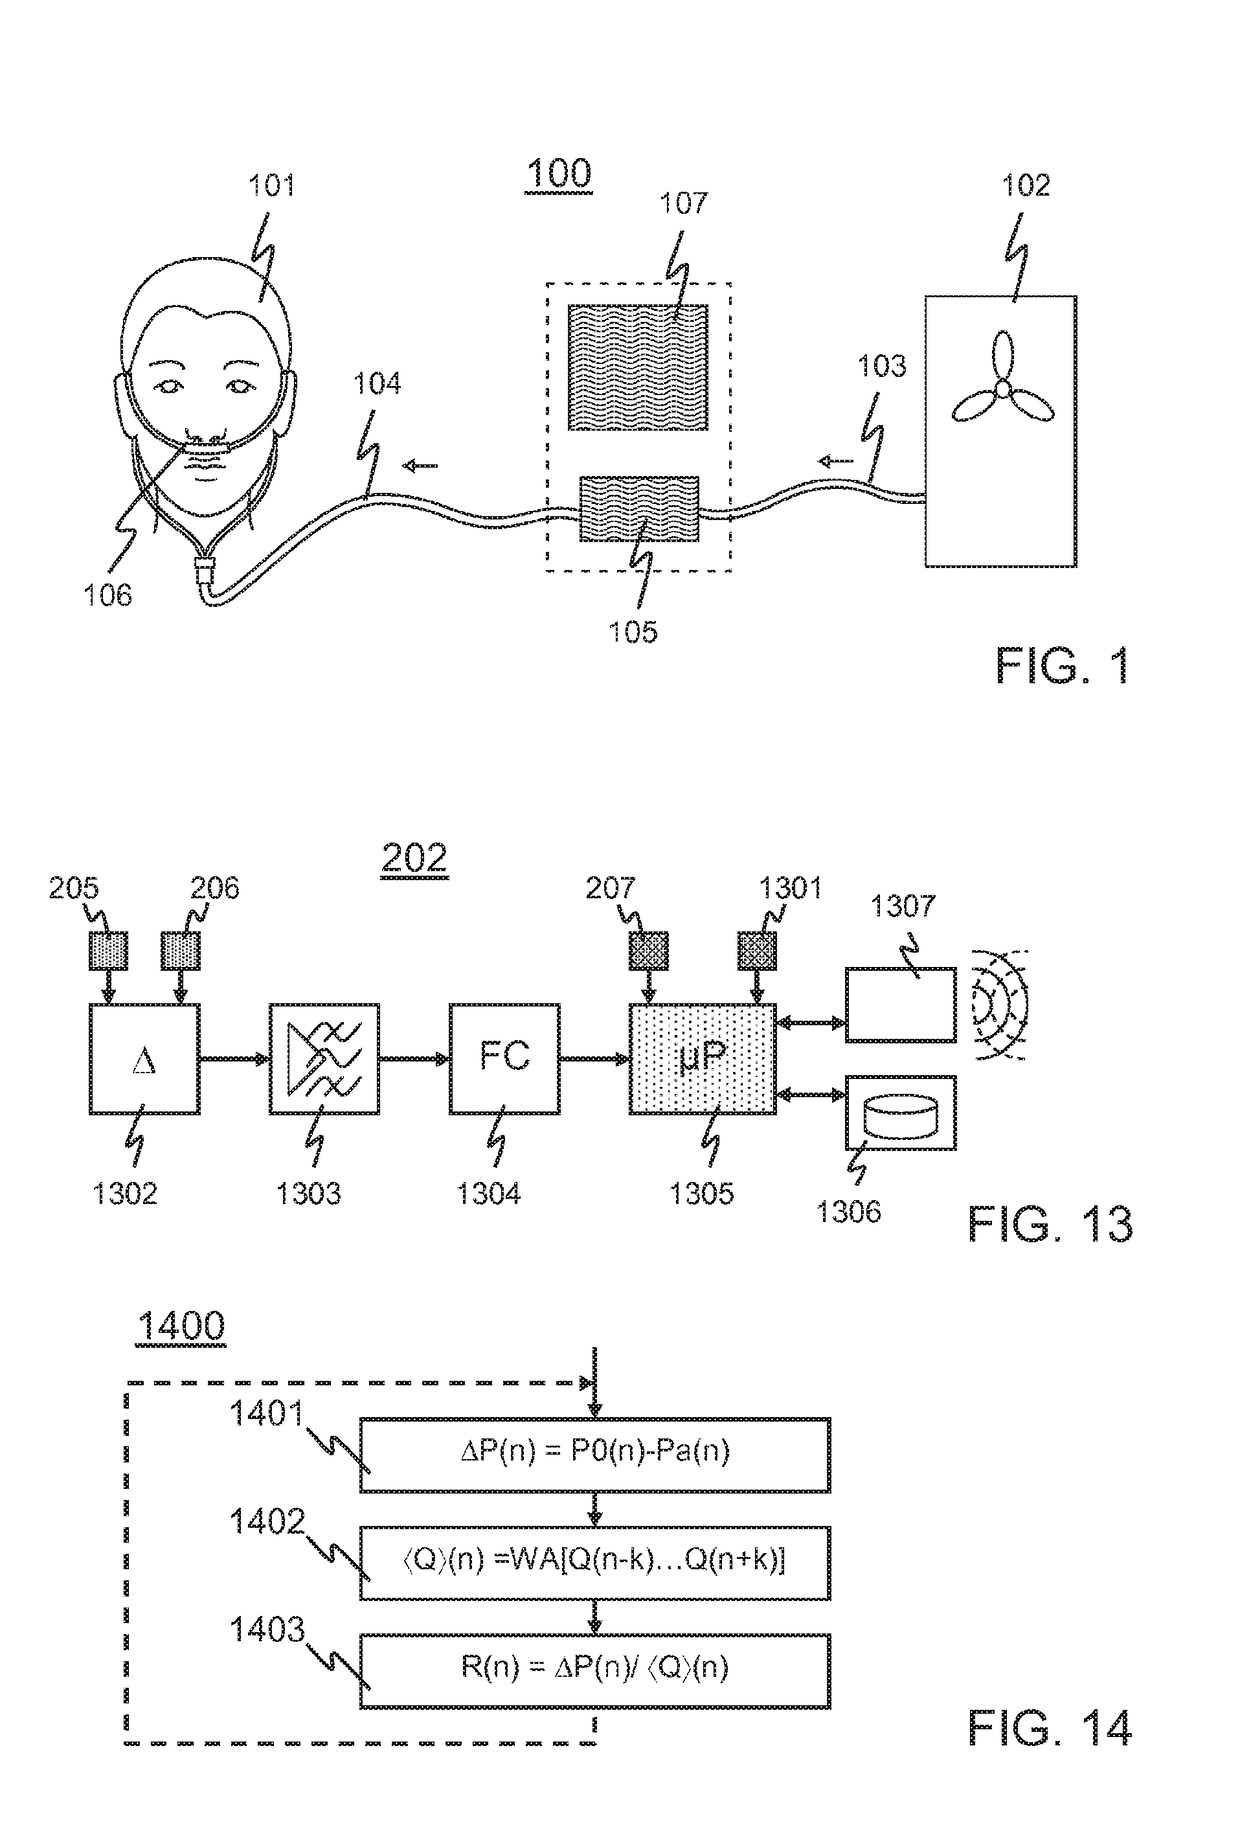 Oxygen therapy monitoring device and method